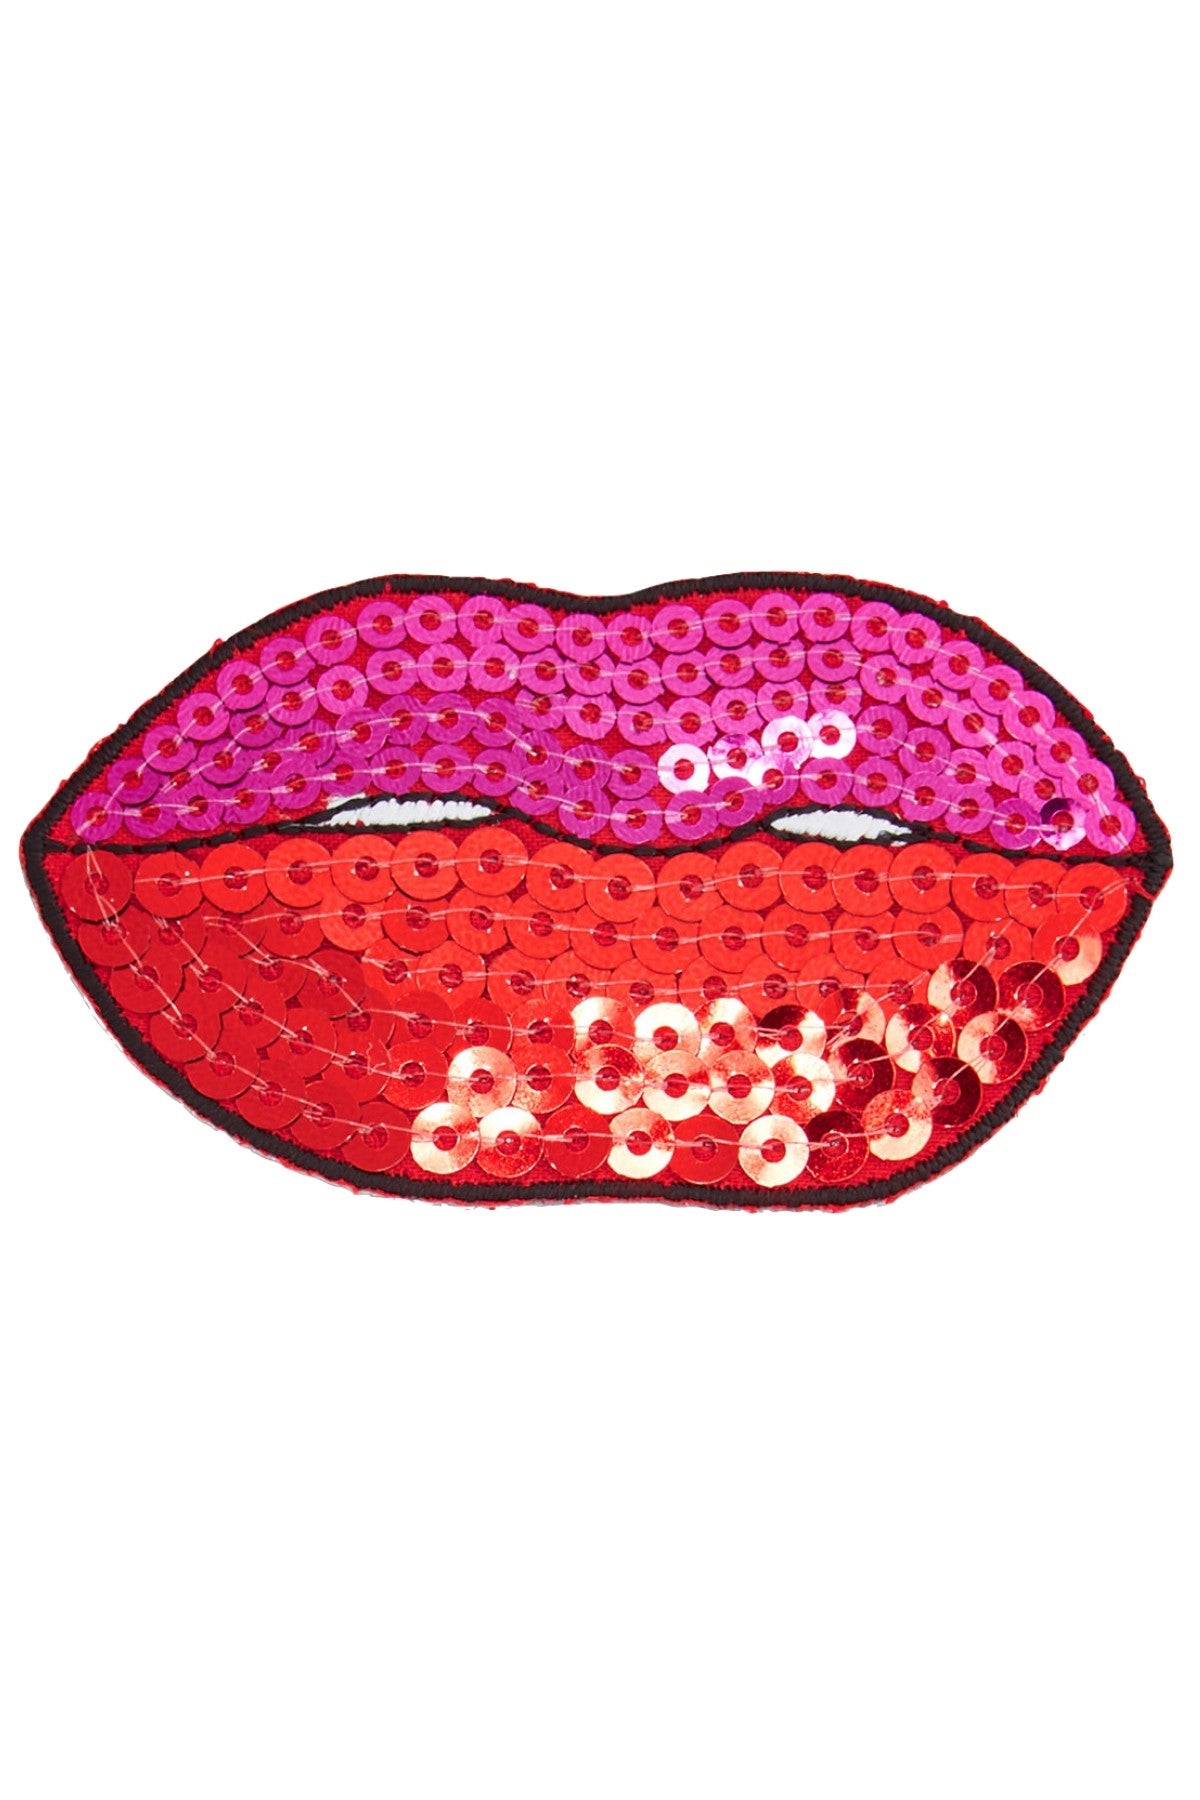 TwelveNYC Red/Multi Cherry/Lips 2-Pc Sequined Adhesive Patches